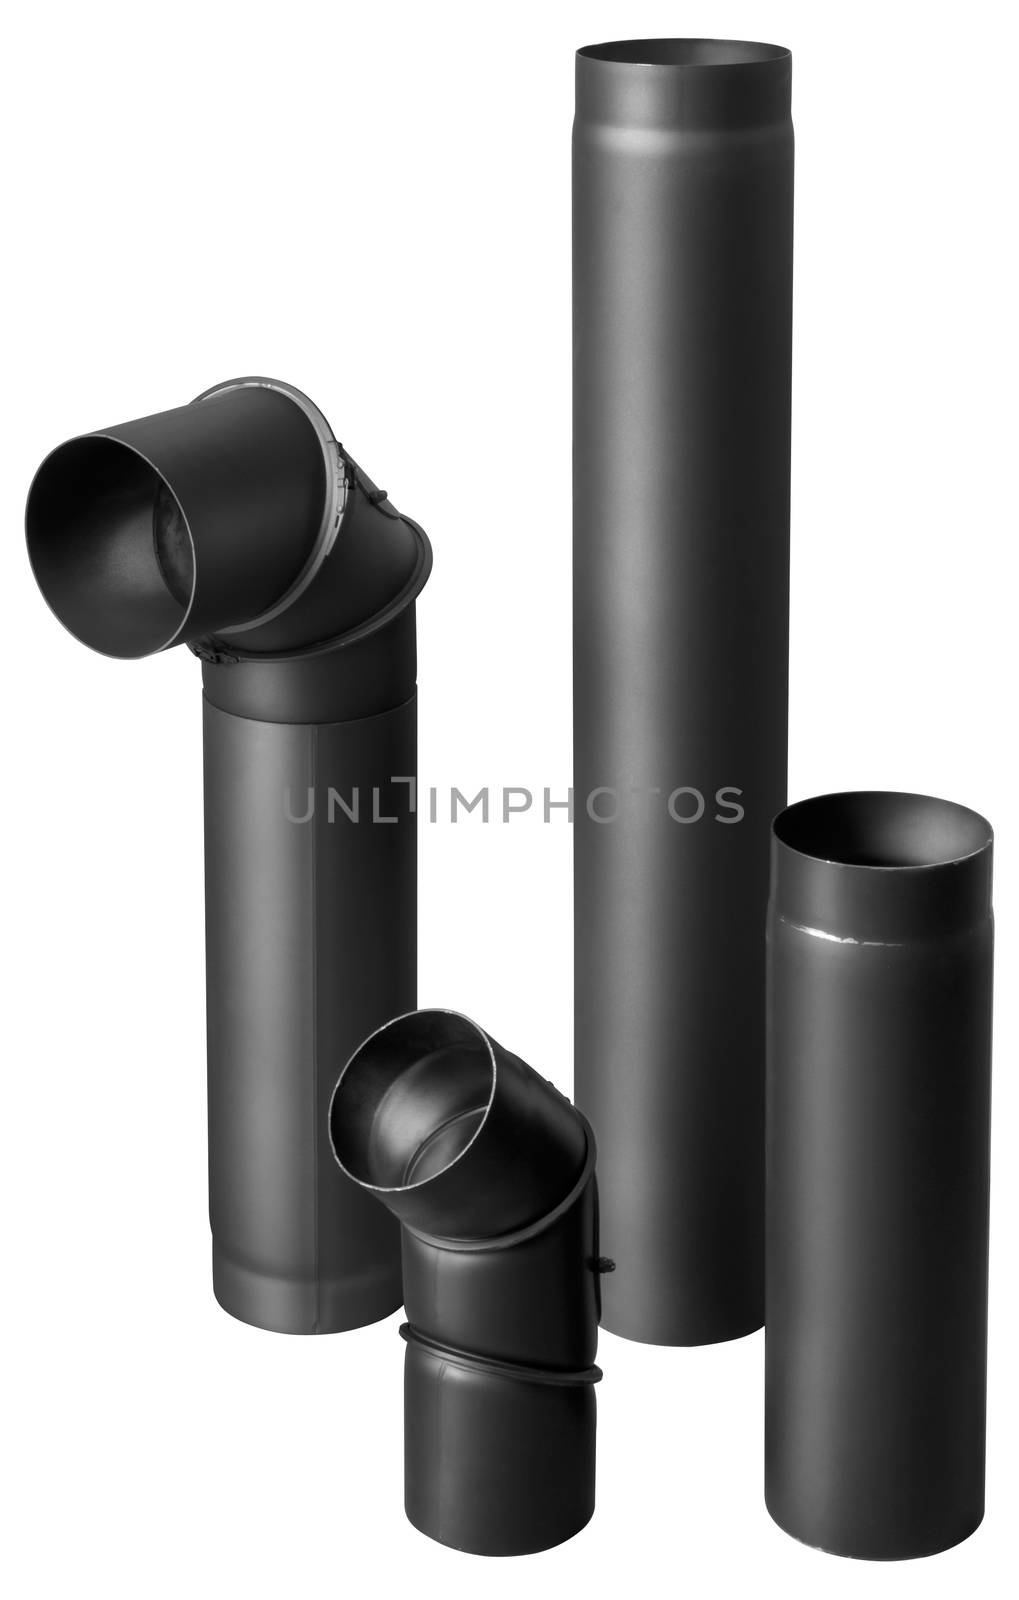 black fire-resistant pipes by Pellinni